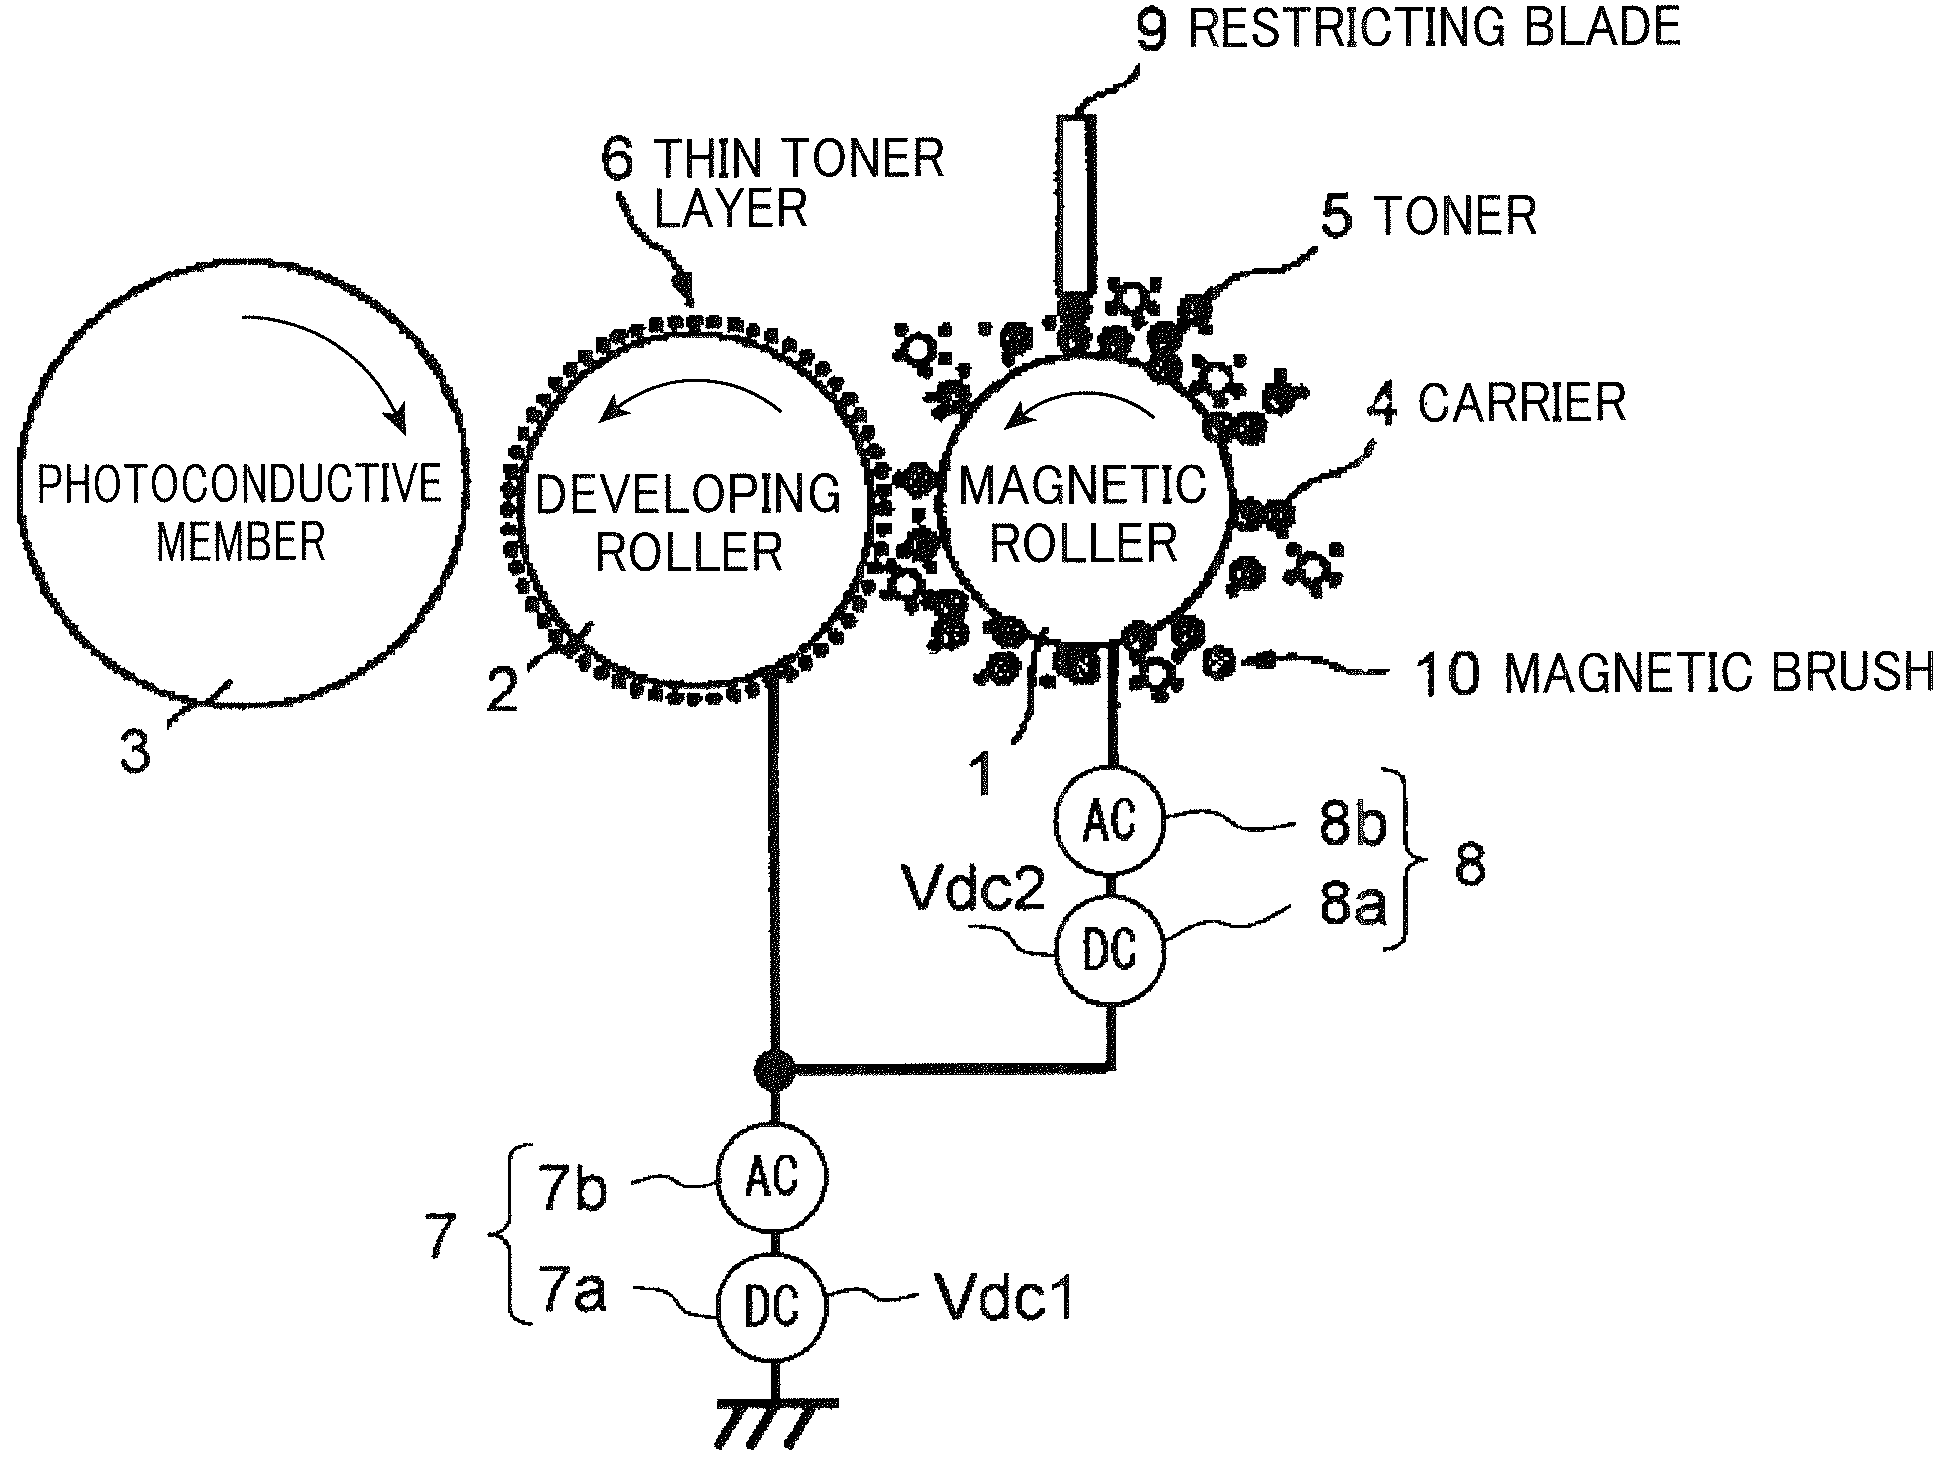 Image forming apparatus with controlled application of alternating-current bias